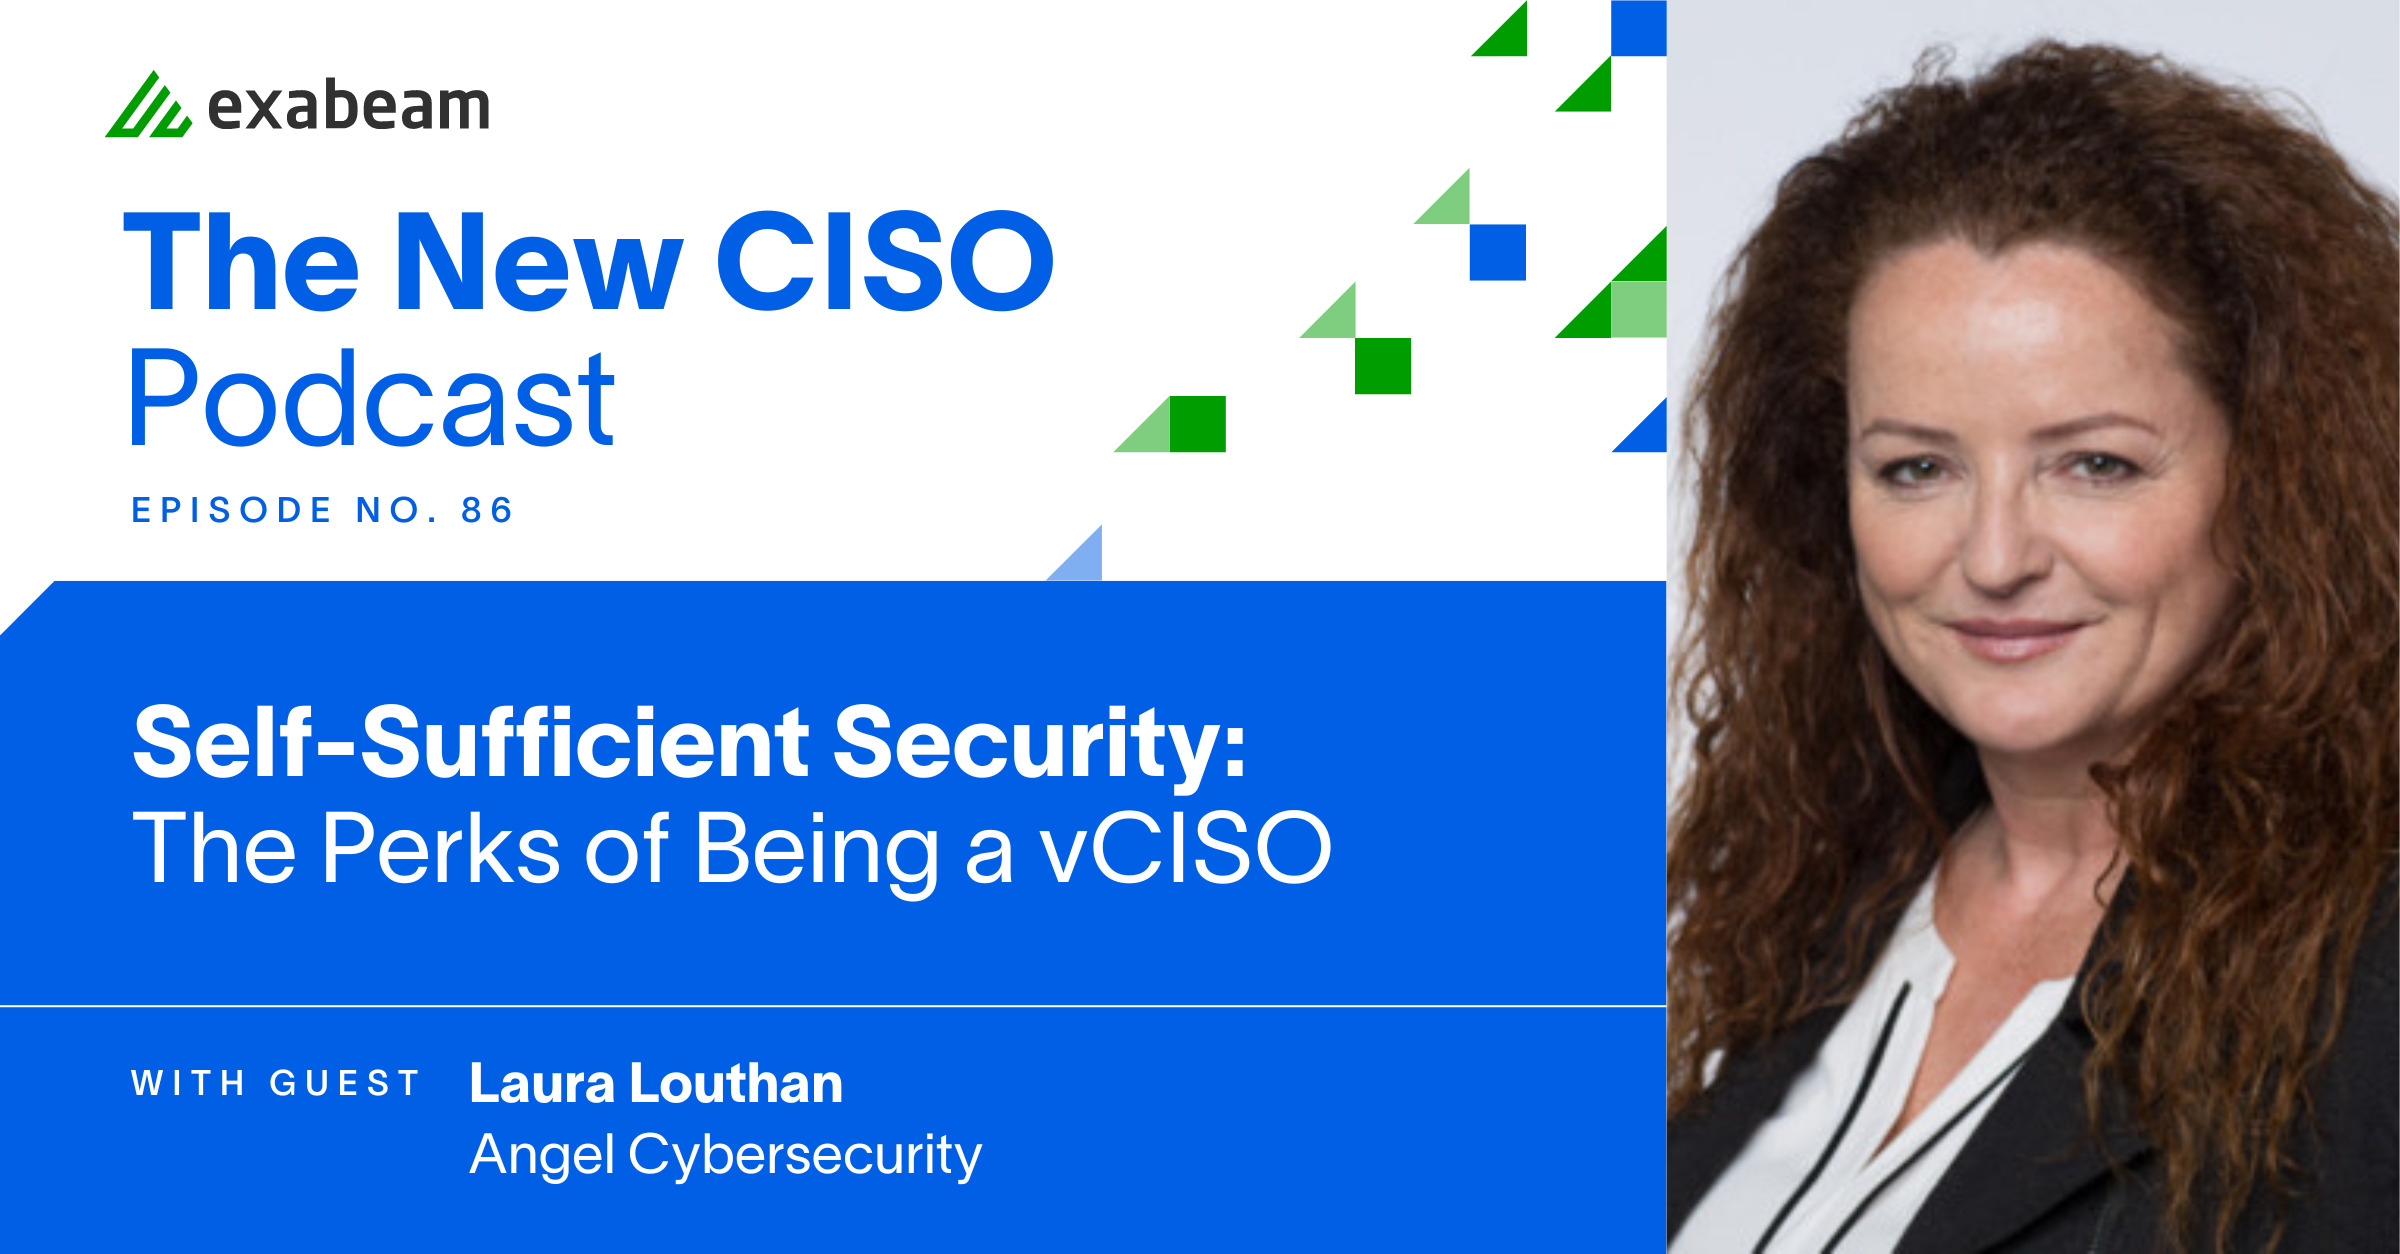 The New CISO Podcast Episode 86: "Self-Sufficient Security: The Perks of Being a vCISO" with guest Laura Louthan